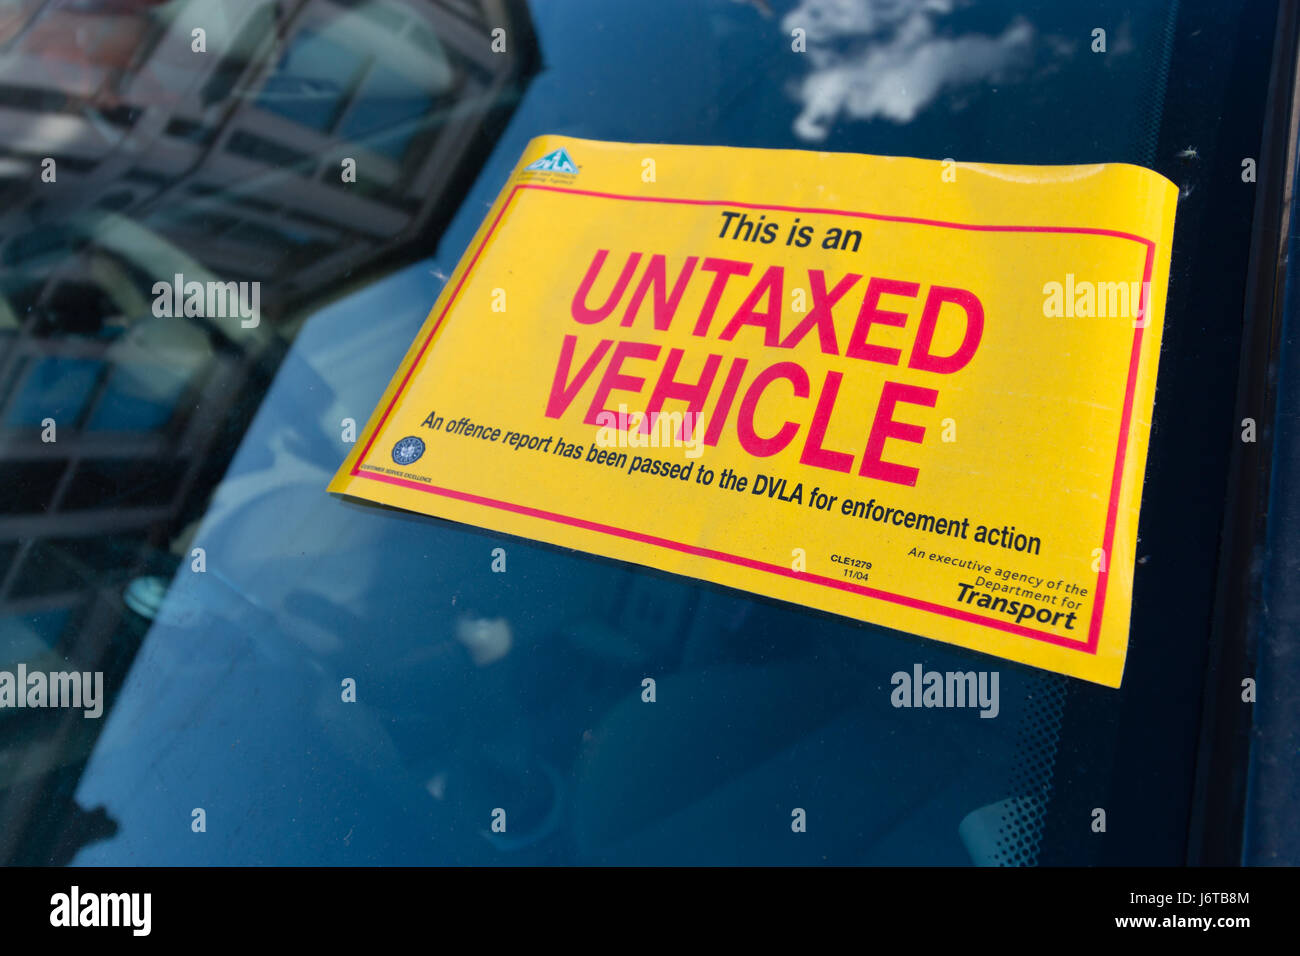 An Untaxed vehicle sign on a car windscreen Stock Photo